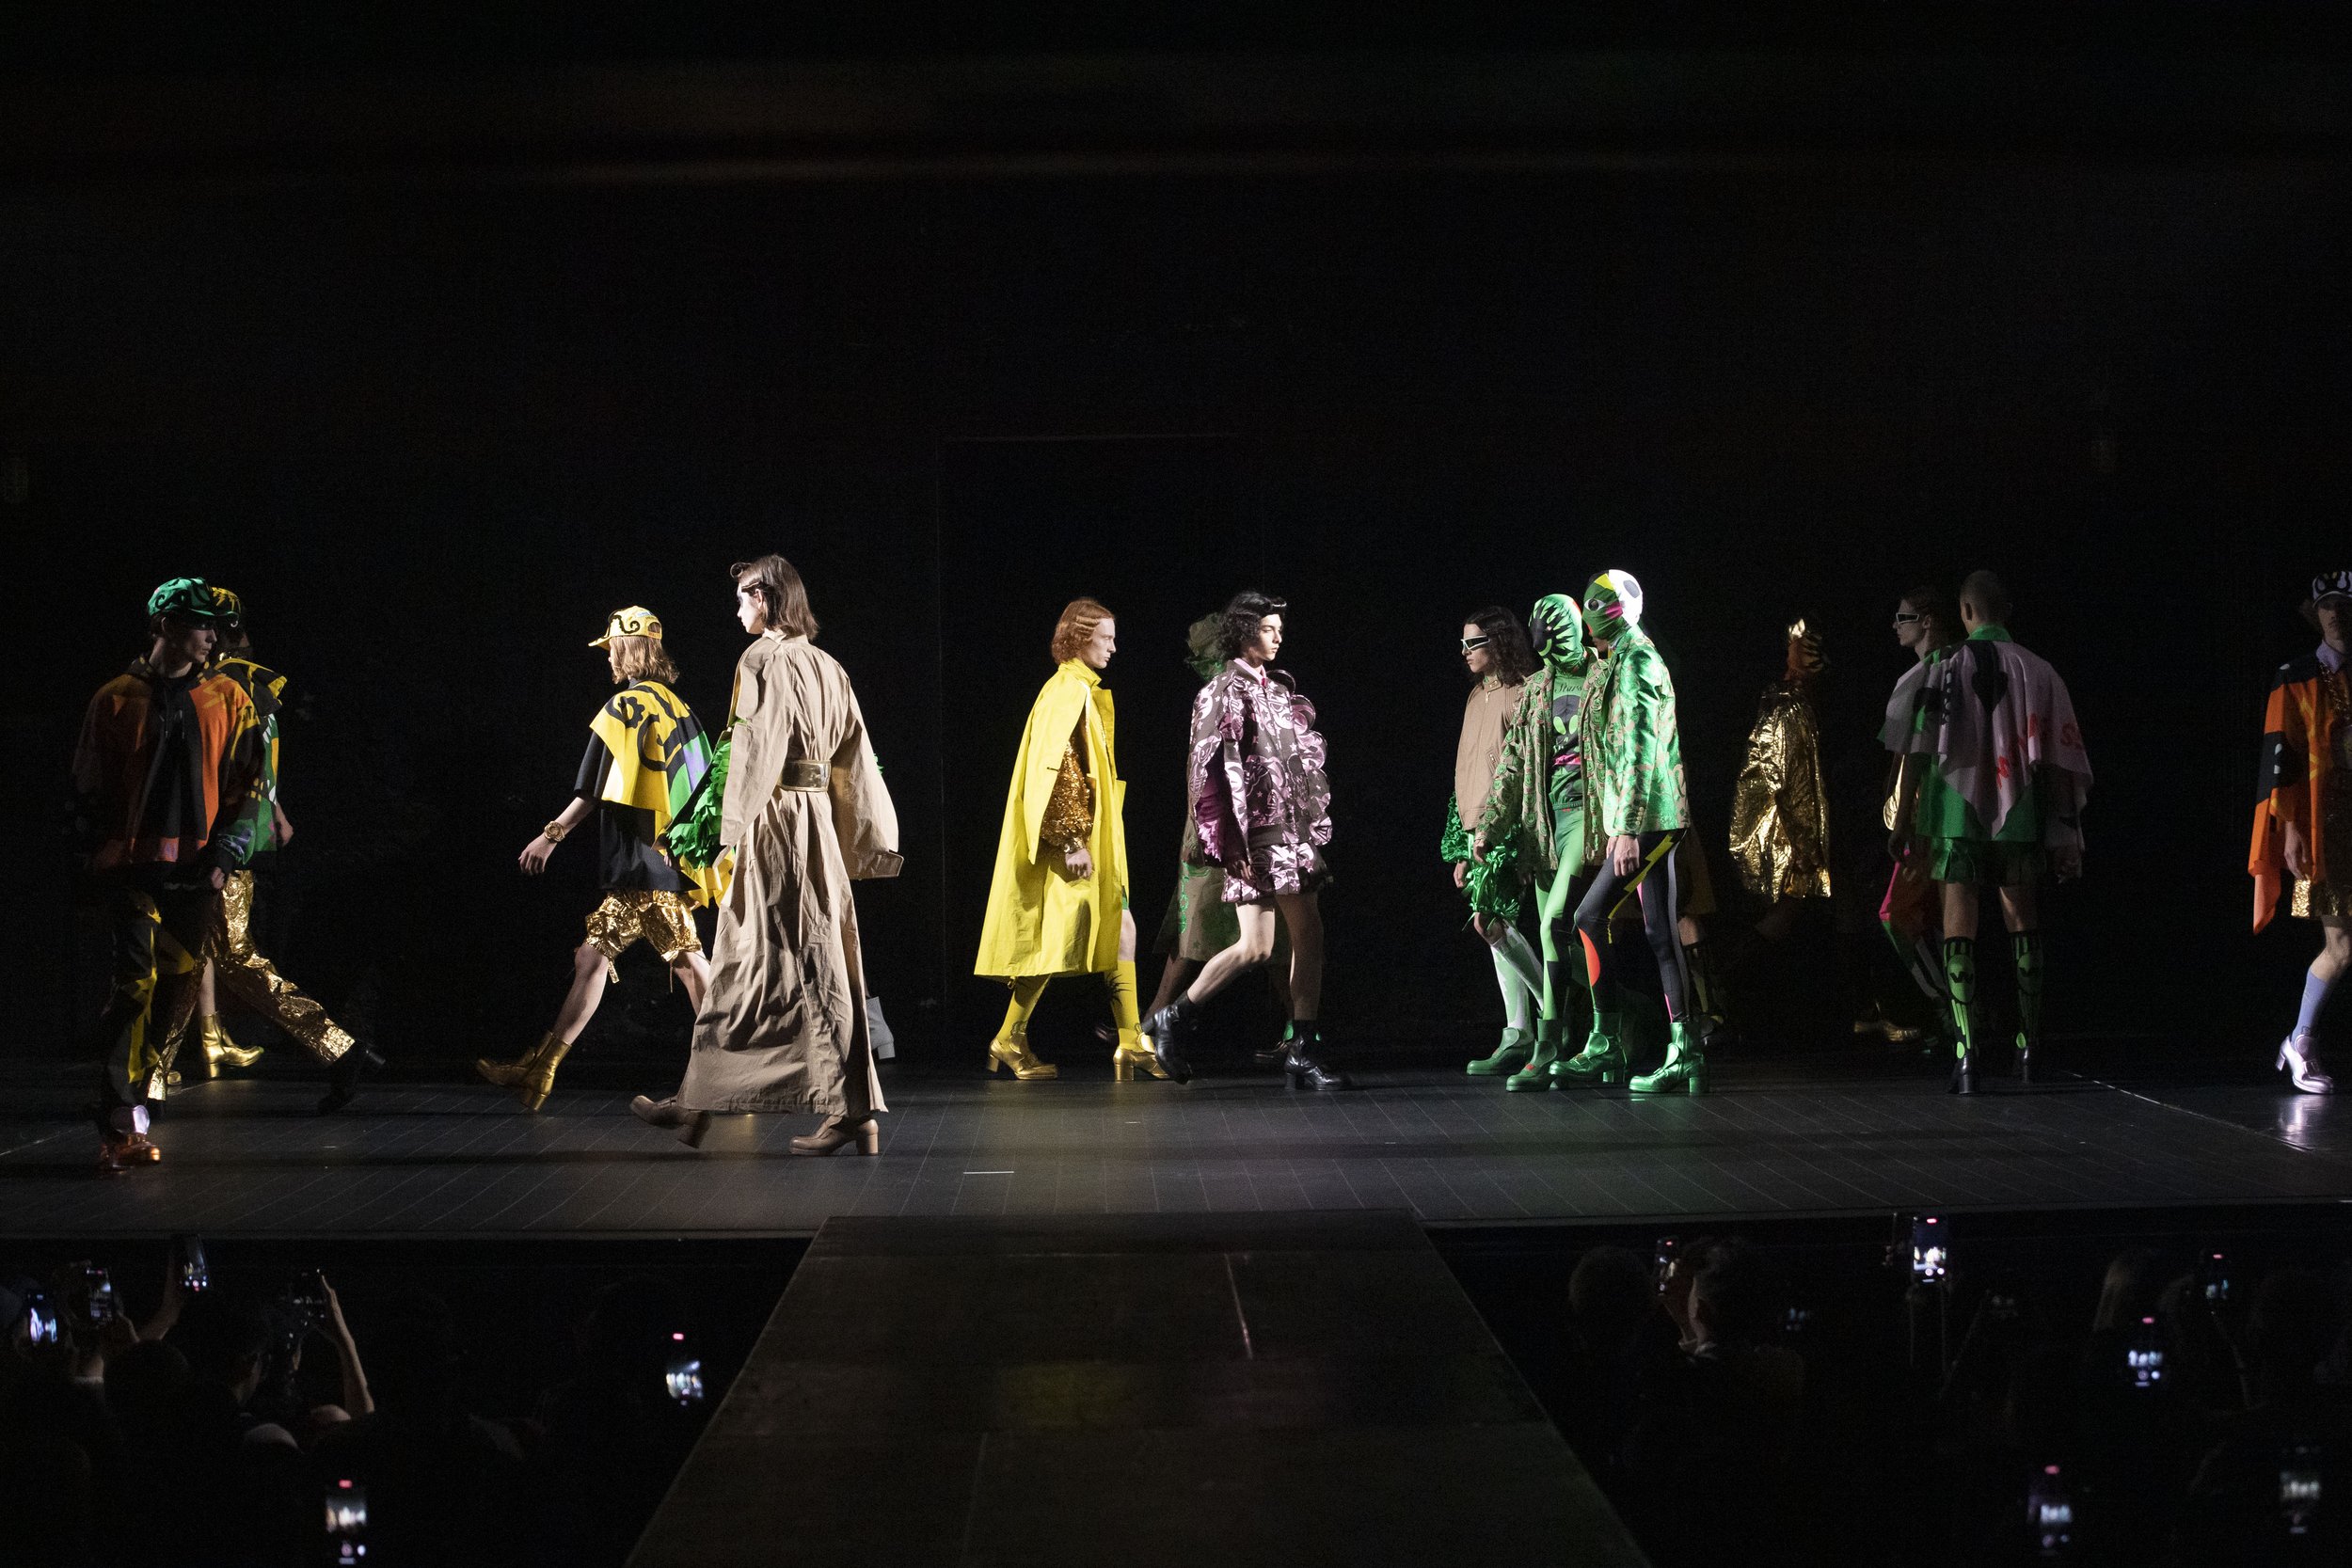 Interview - Walter Van Beirendonck, AW16 Woest Collection – Paper